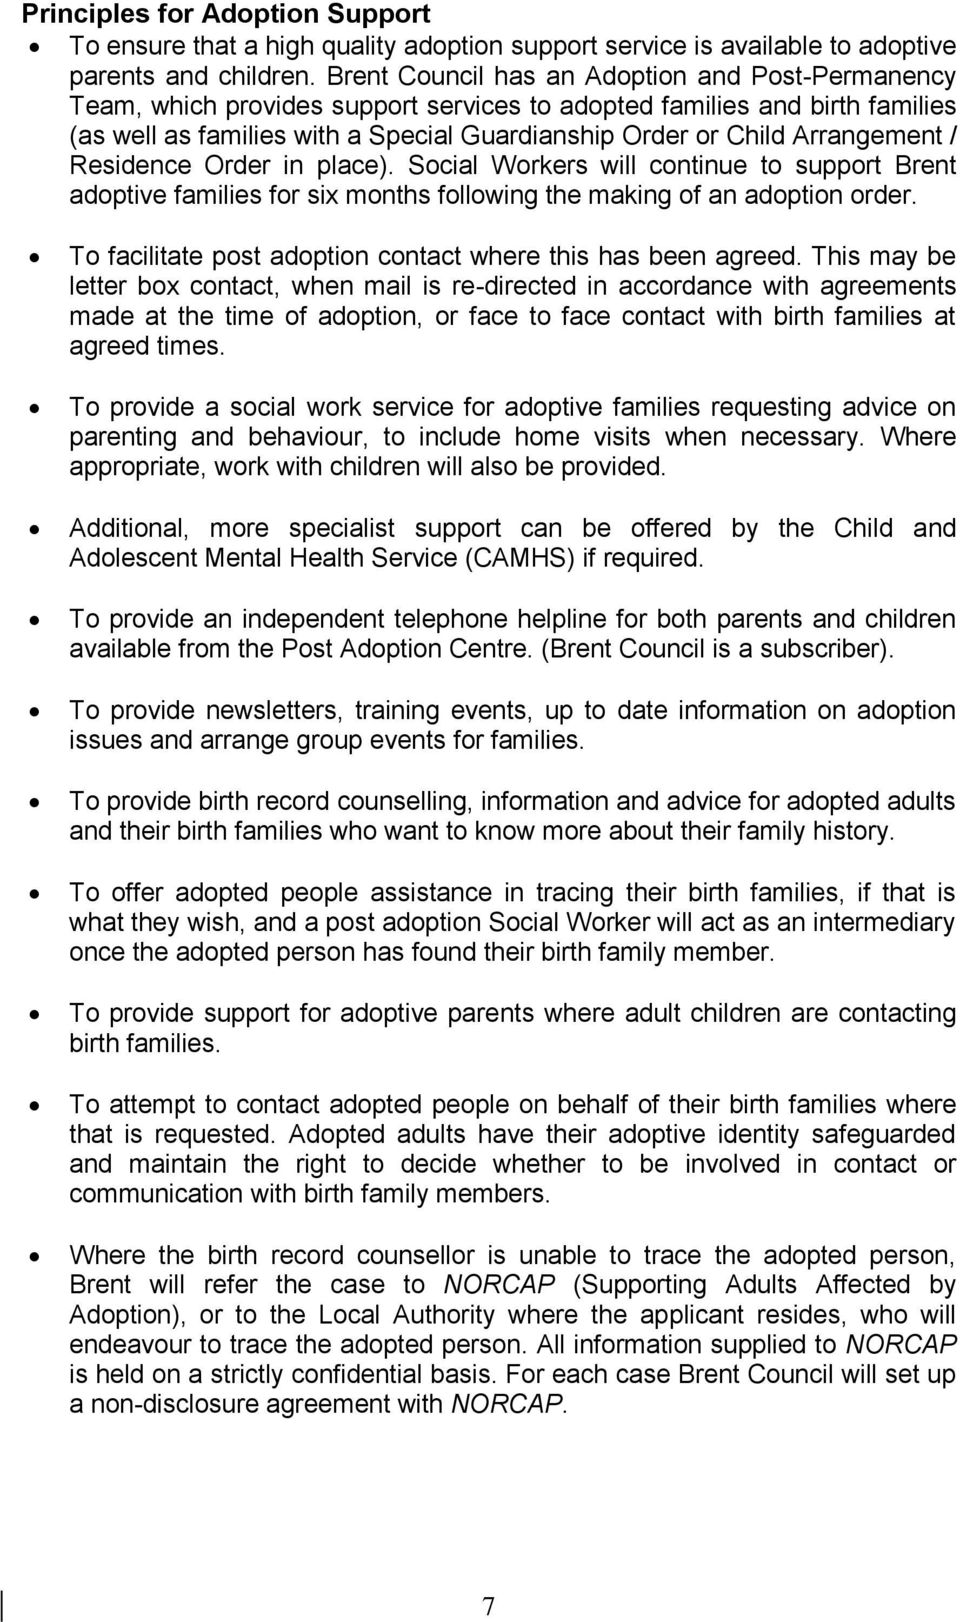 Arrangement / Residence Order in place). Social Workers will continue to support Brent adoptive families for six months following the making of an adoption order.